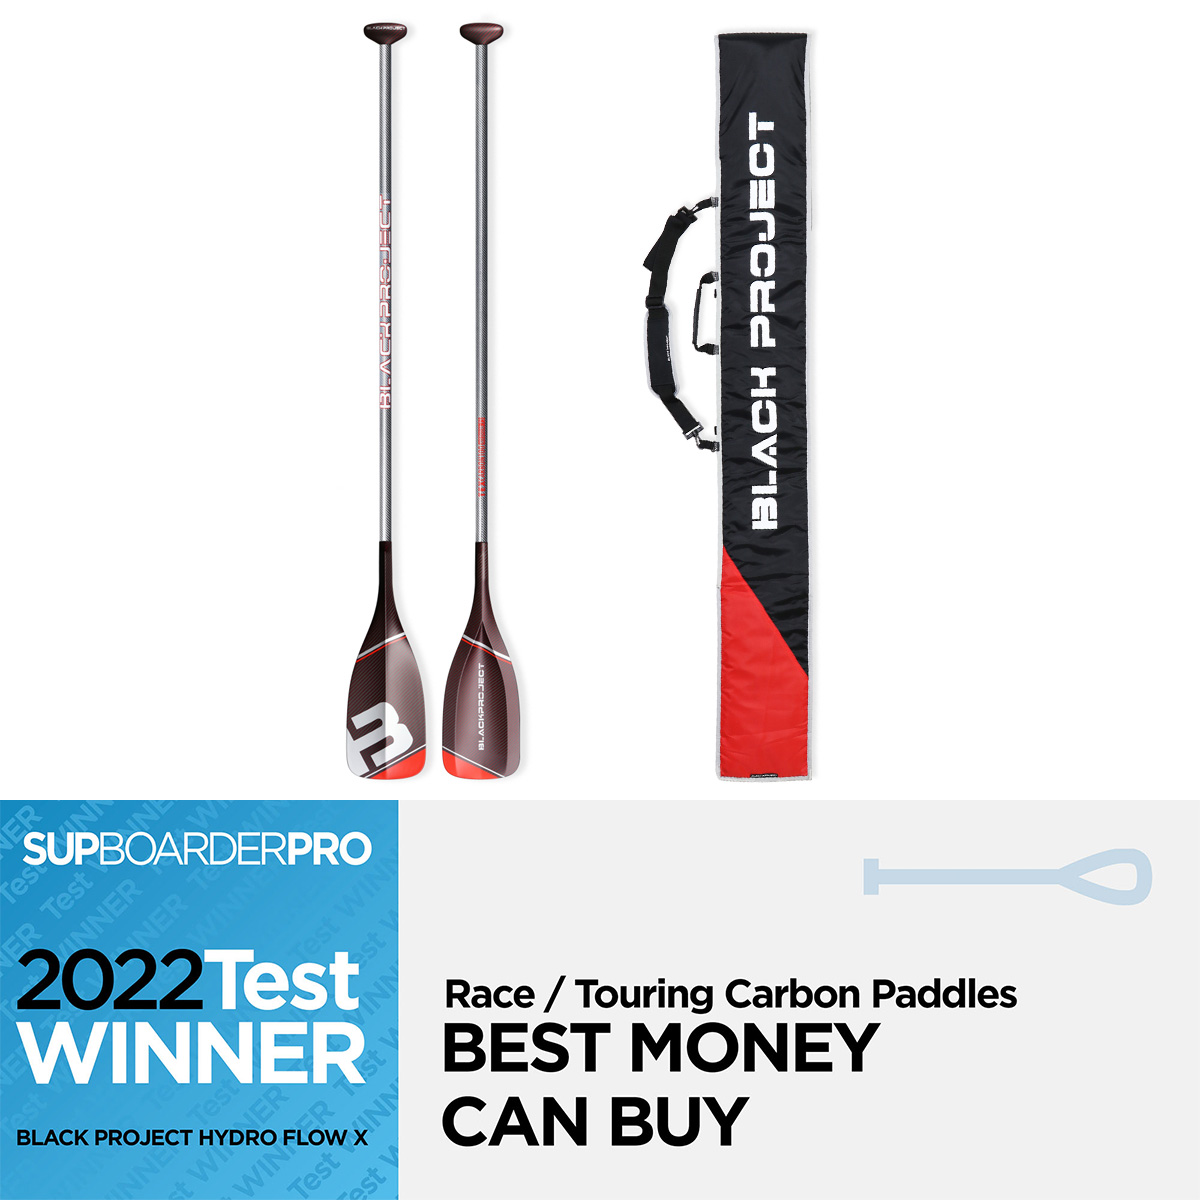 Best carbon sup paddle for touring and racing